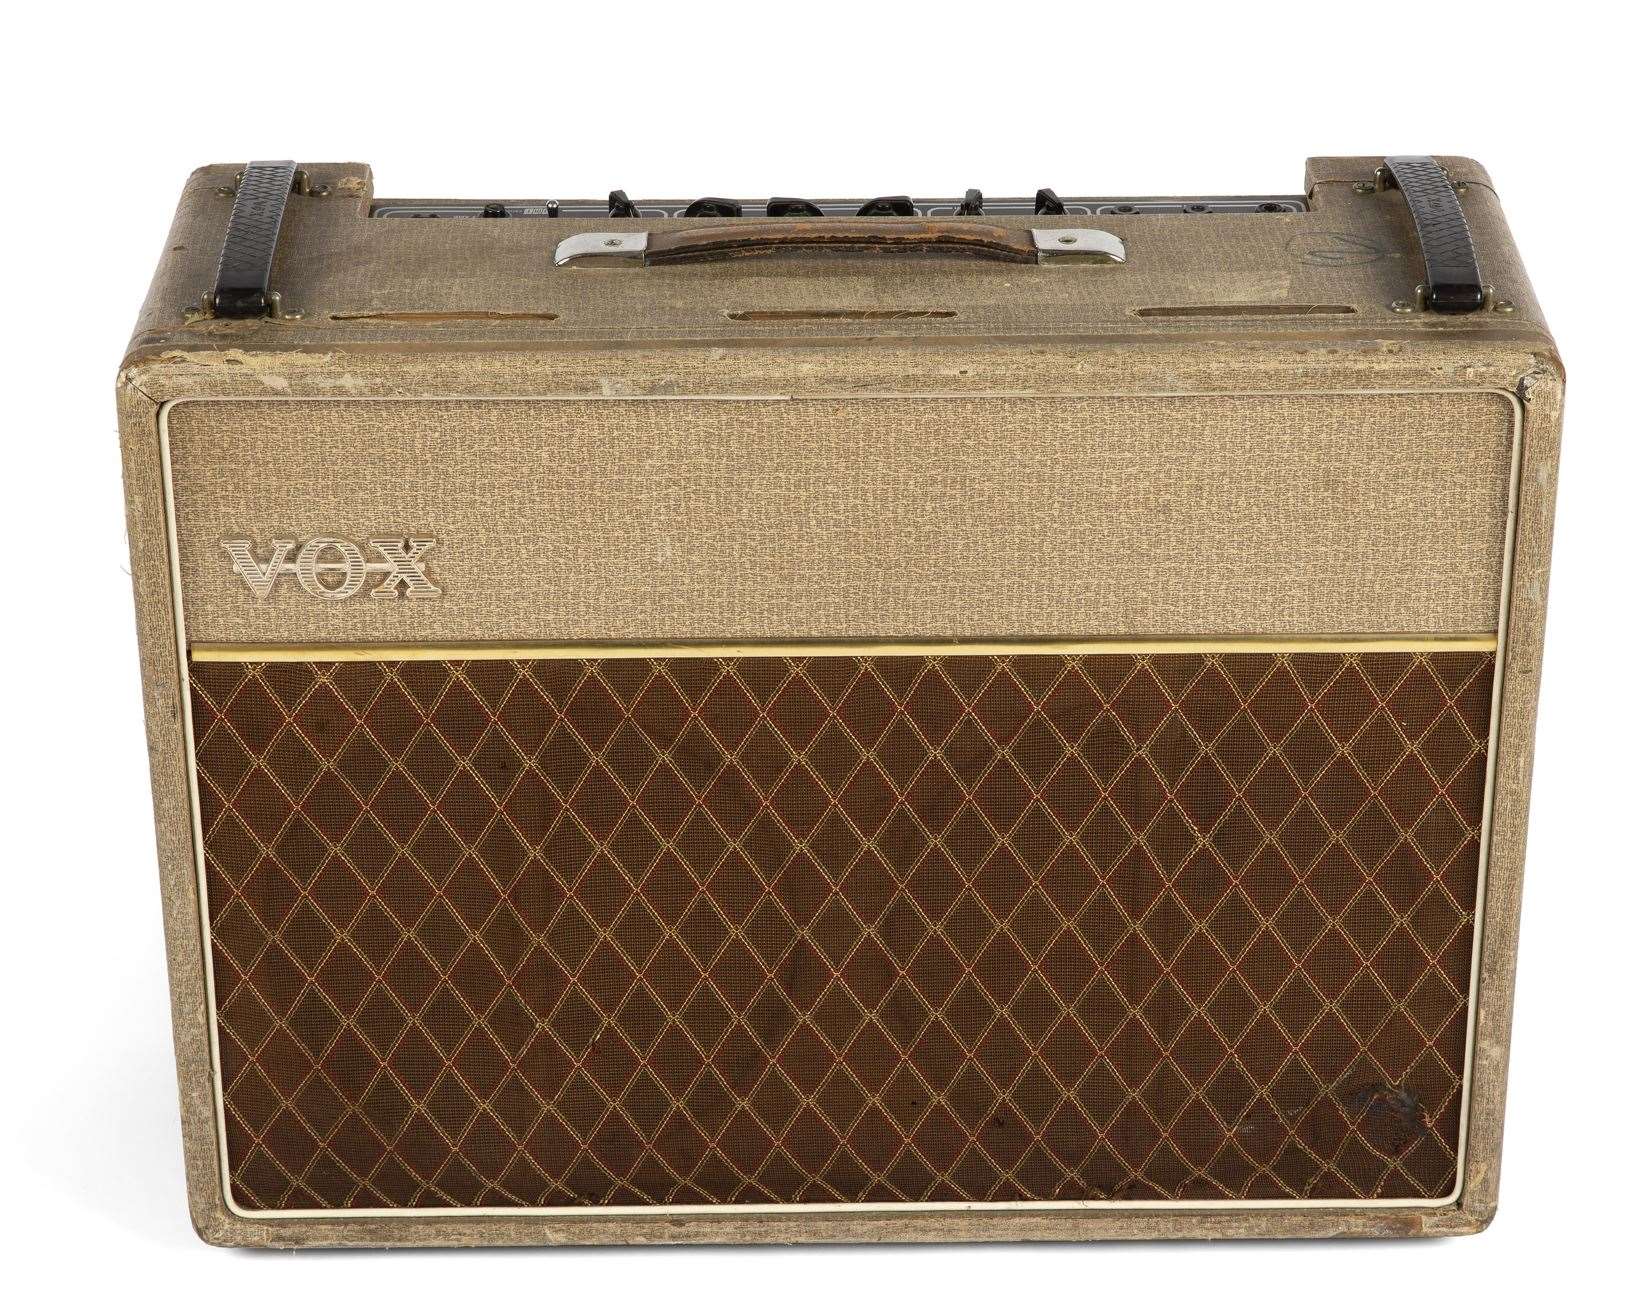 Former Rolling Stone Bill Wyman's 1962 VOX AC30 'Normal' model amplifier built at the Jennings Dartford Road factory Picture: Julien's Auctions